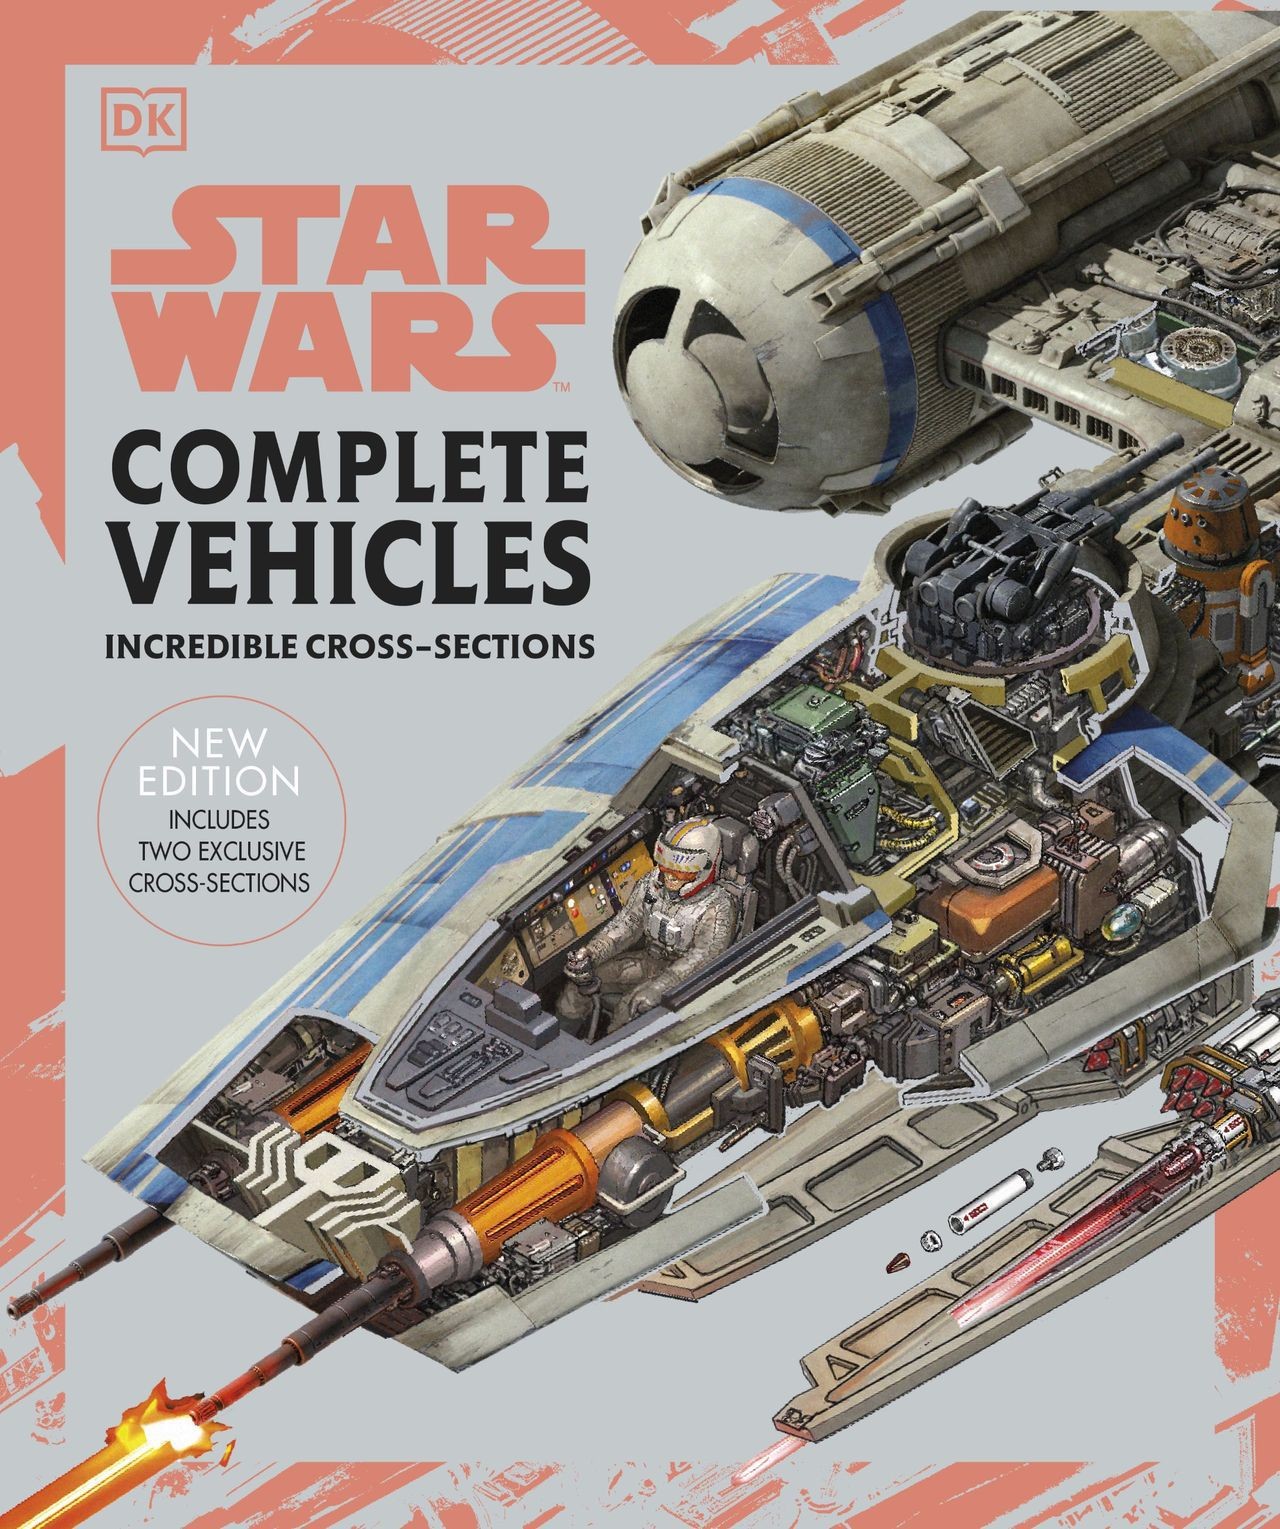 Hardcore Star Wars Complete Vehicles - Incredible Cross-Sections - New Edition Asstomouth